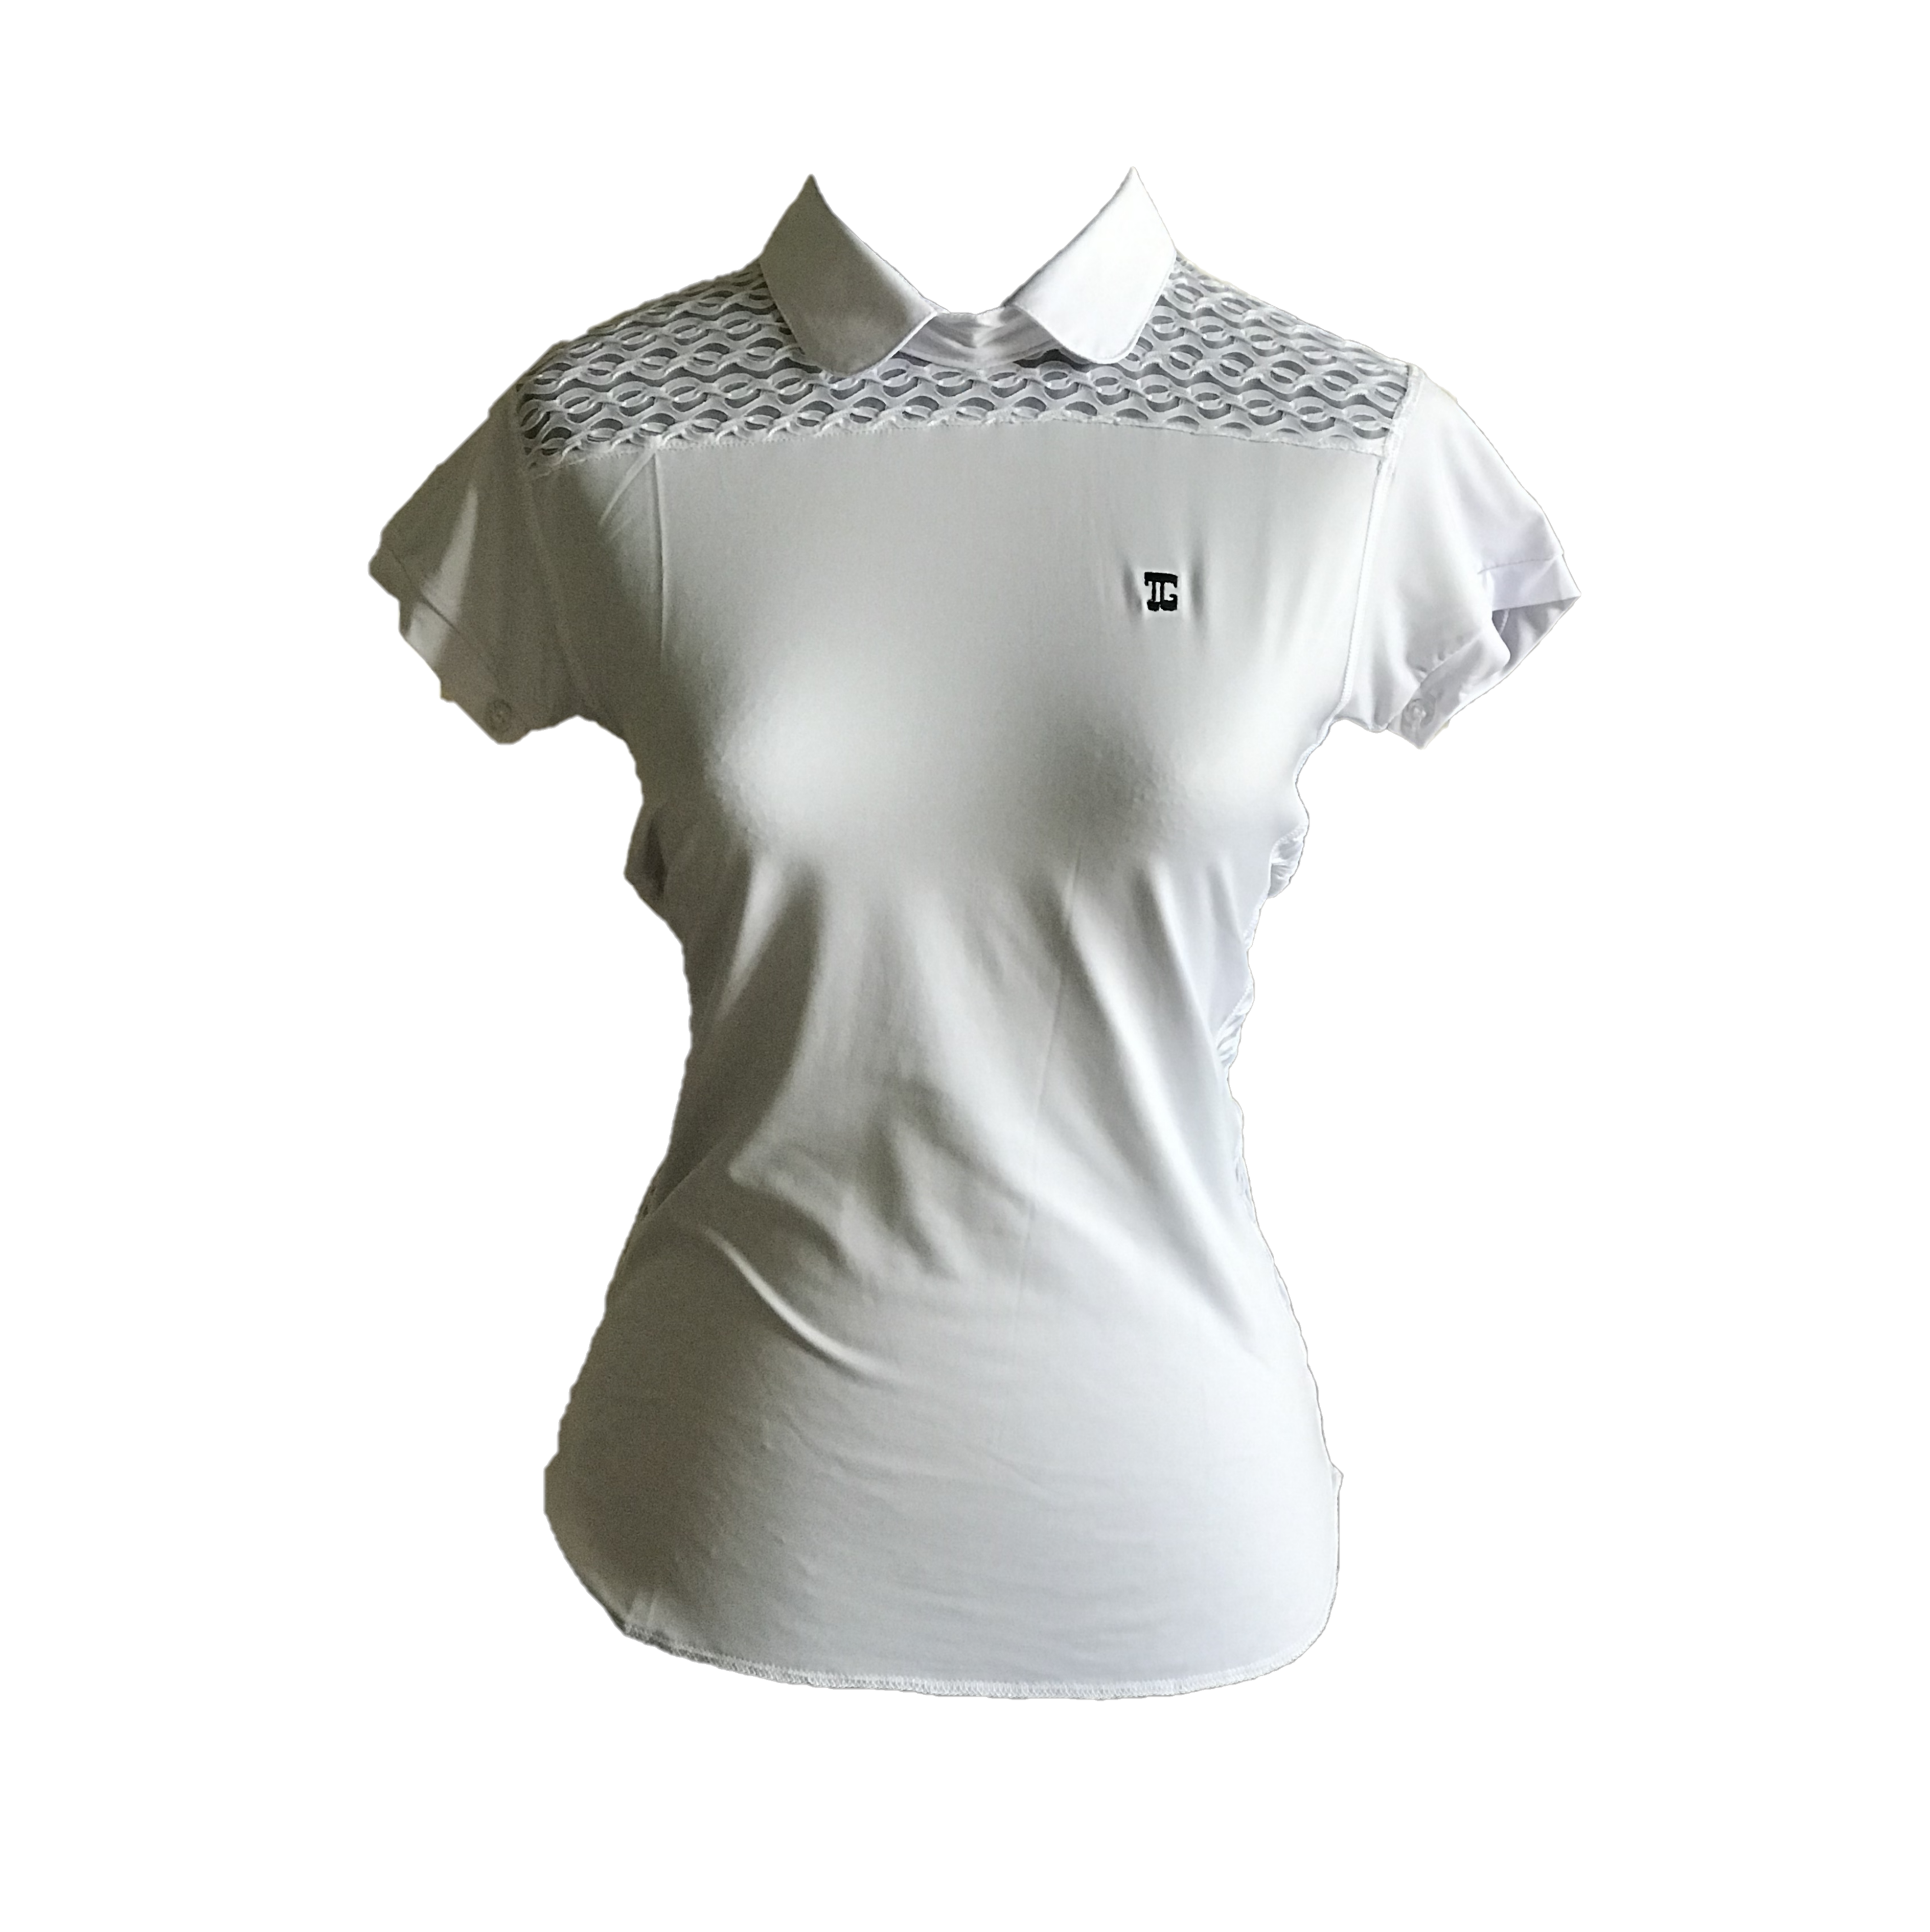 LT-089 || Ladies Top White With Faux Lace Shoulder Saddle on Front and Side Panels –  Rear Zip Peter Pan Collar